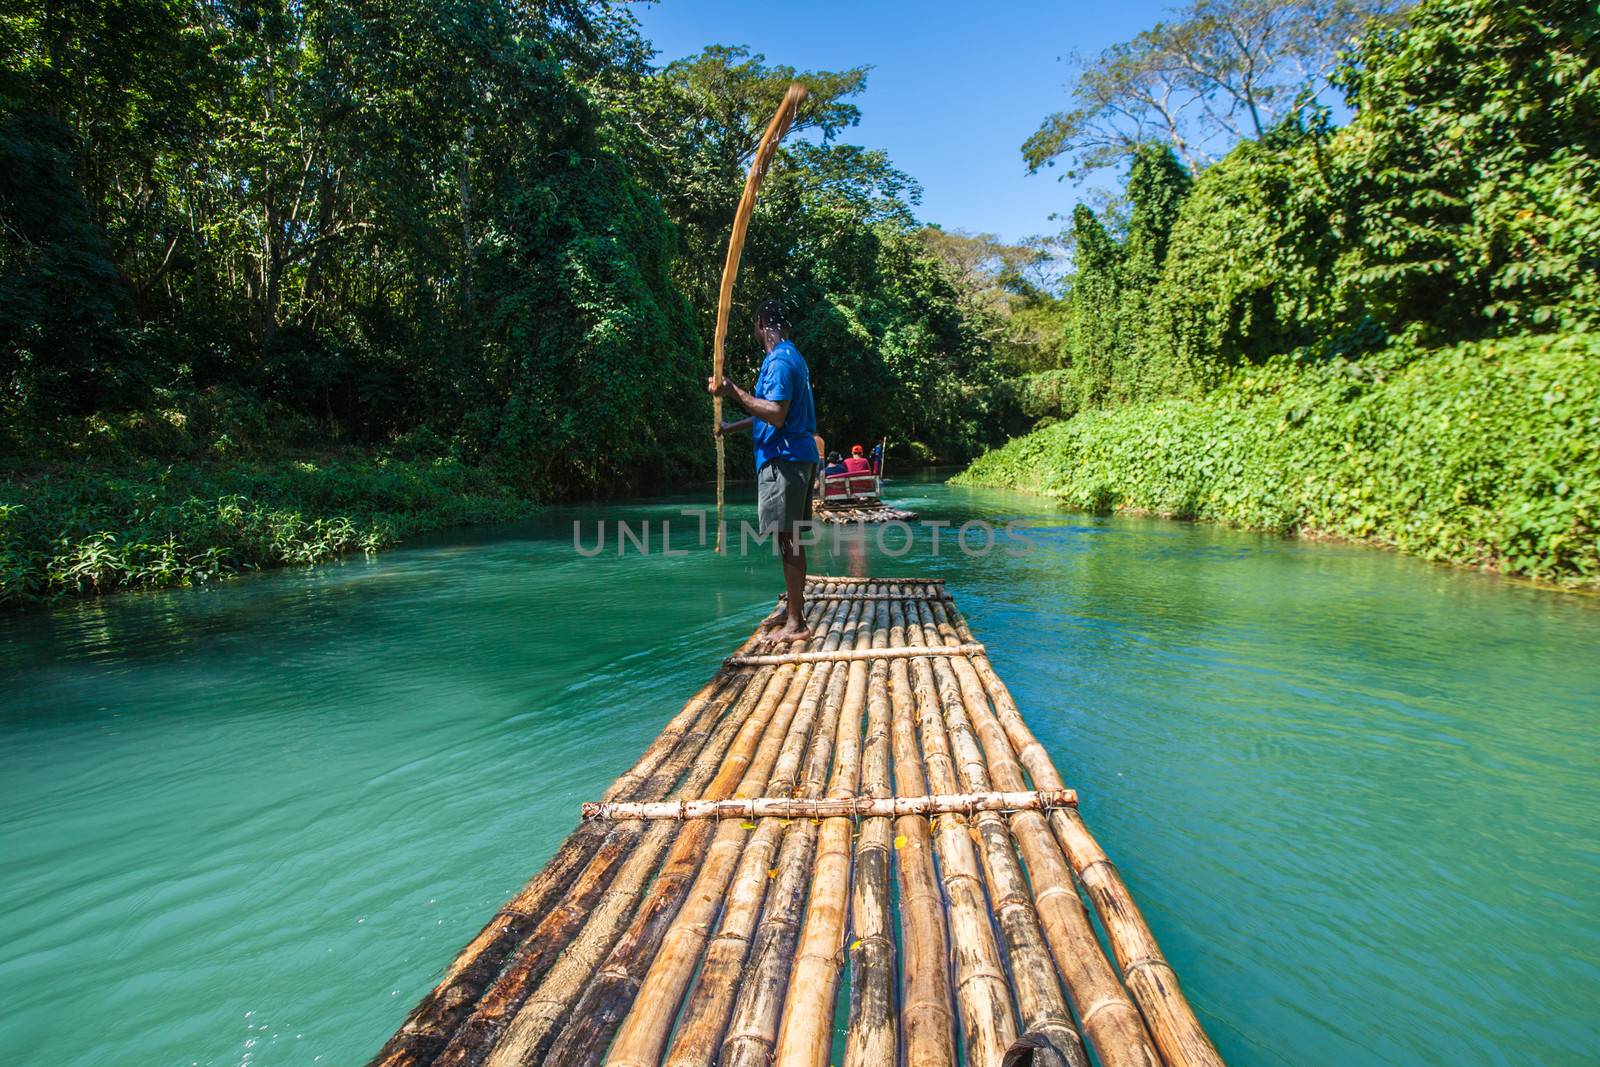 Bamboo River Tourism in Jamaica by Creatista